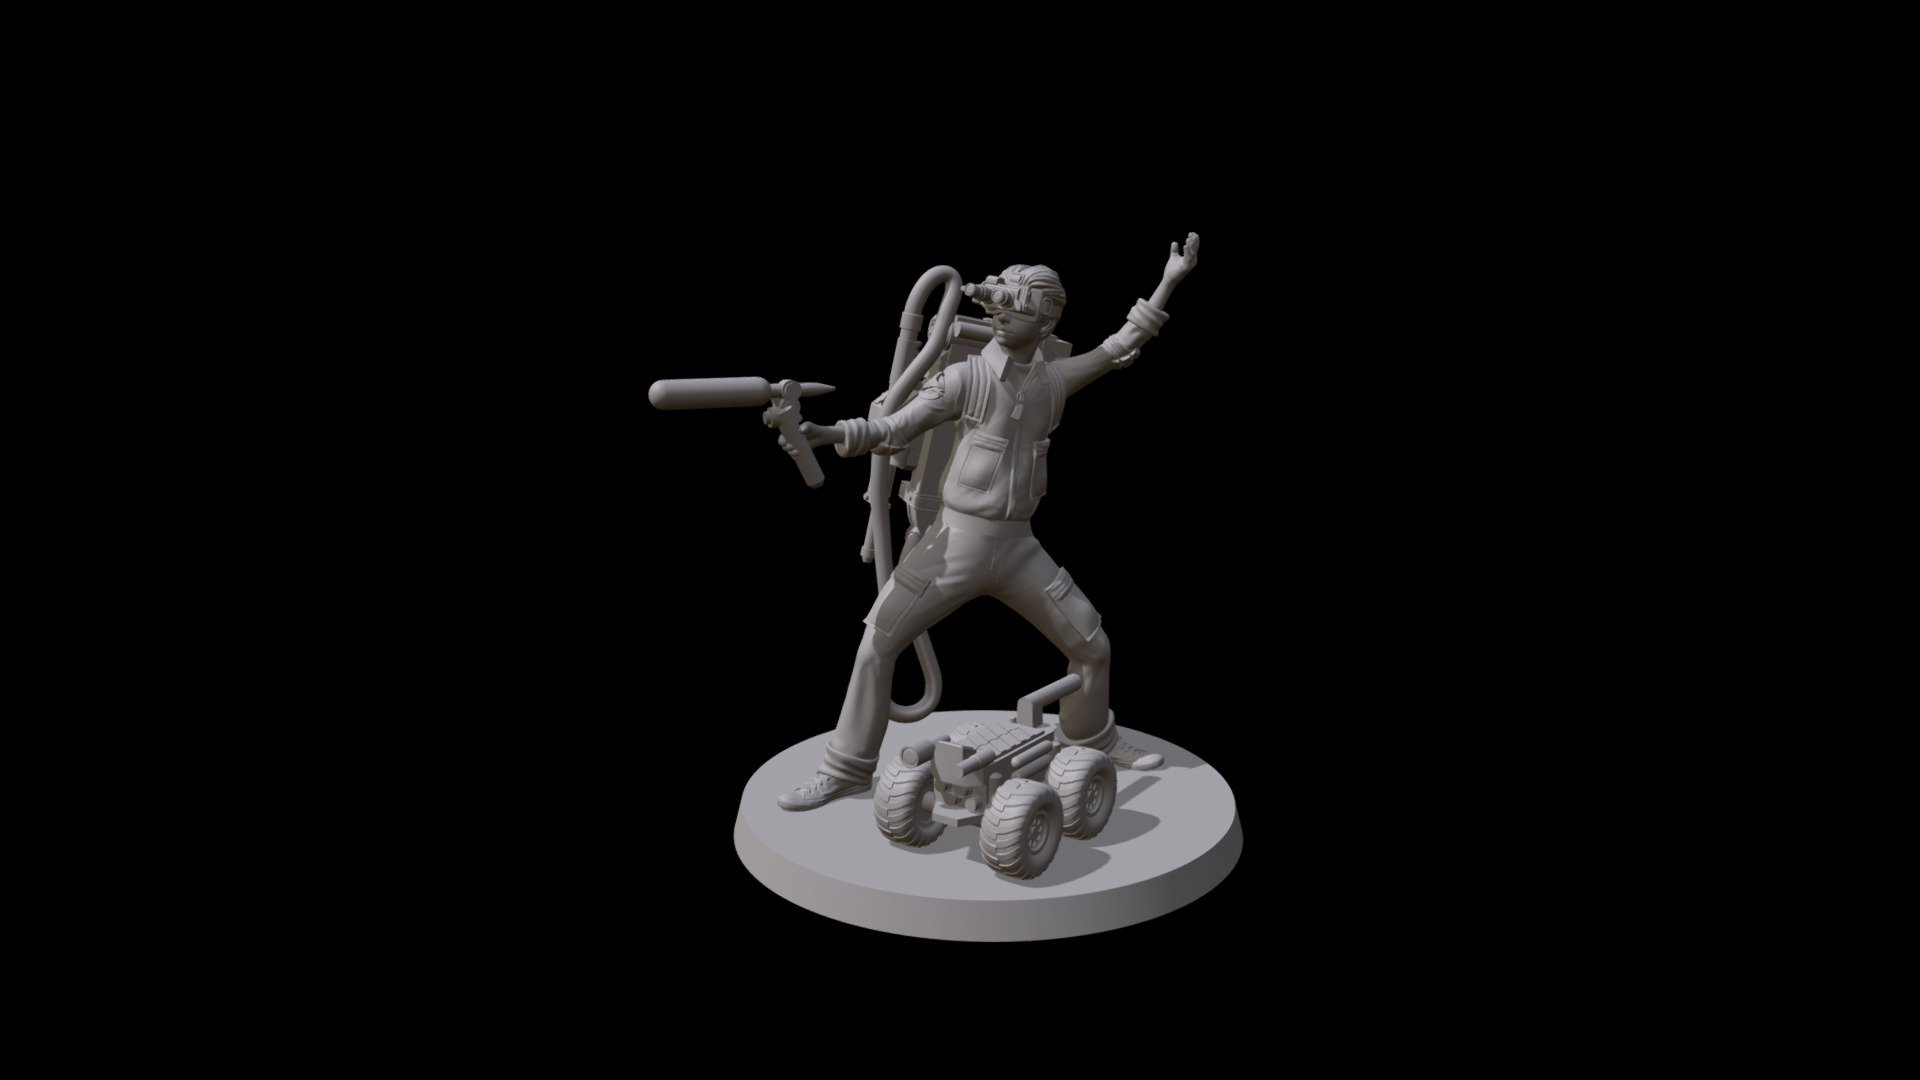 Ghostbusters: Afterlife
Podcast
Designed for use in Cryptozoic's Ghostbuster boardgames
Commissioned by Zander Nao
3D Model Created by Phazzzer - GBAL - Podcast V0 - 3D model by jchapman1984 3d model